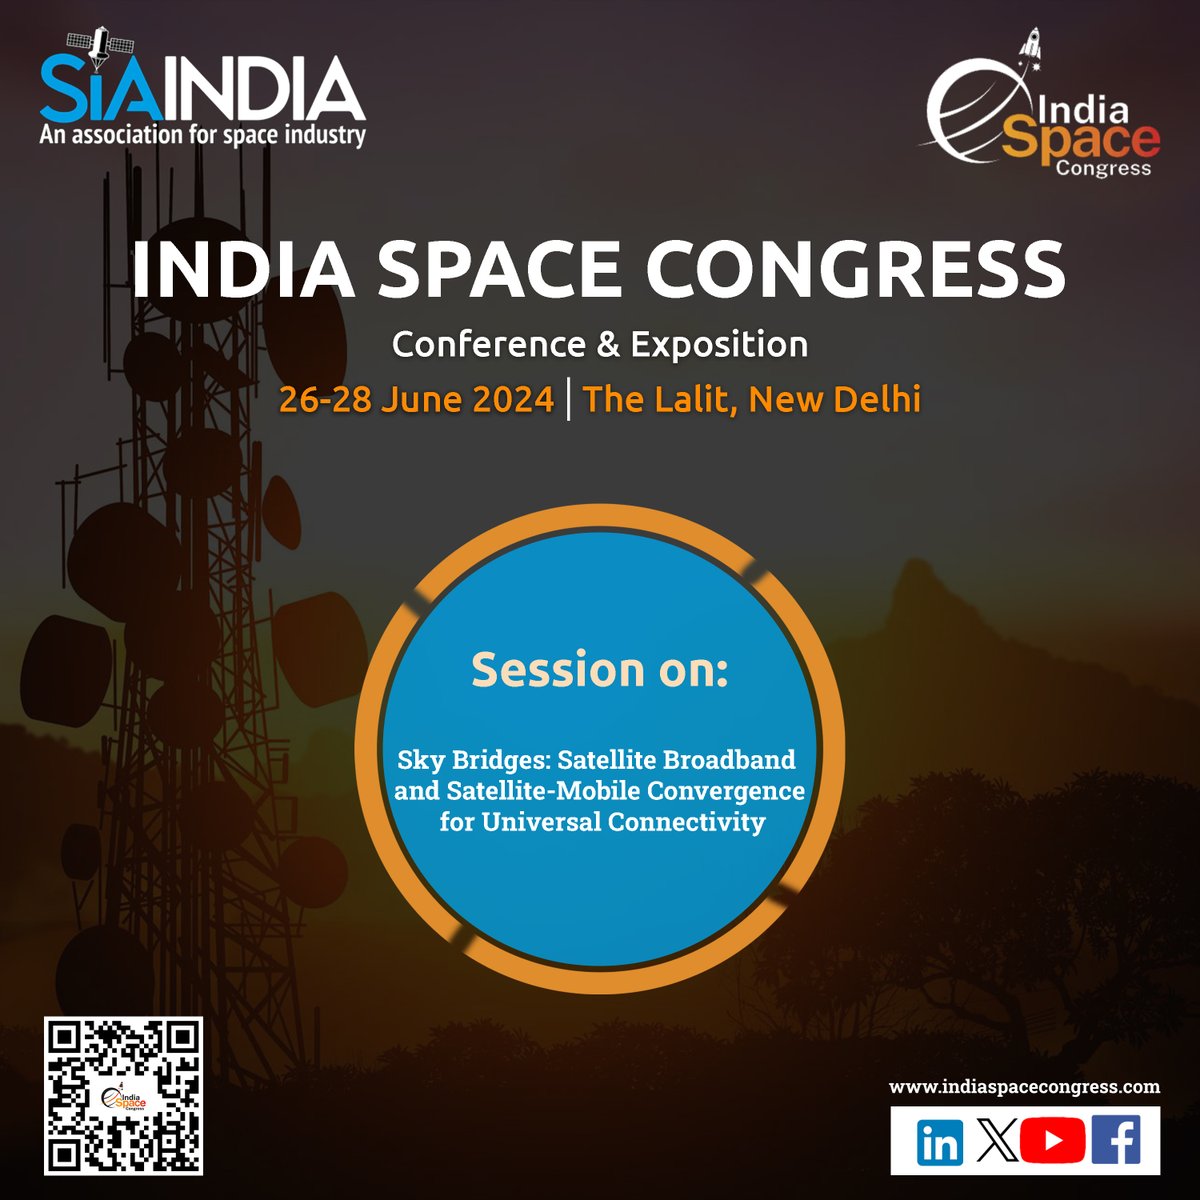 Embark on a journey into satellite technology's future at the India Space Congress, June 26th-28th, 2024, The Lalit, New Delhi! Explore session on Sky bridges: satellite broadband and satellite mobile convergence for universal connectivity! Register now! indiaspacecongress.com